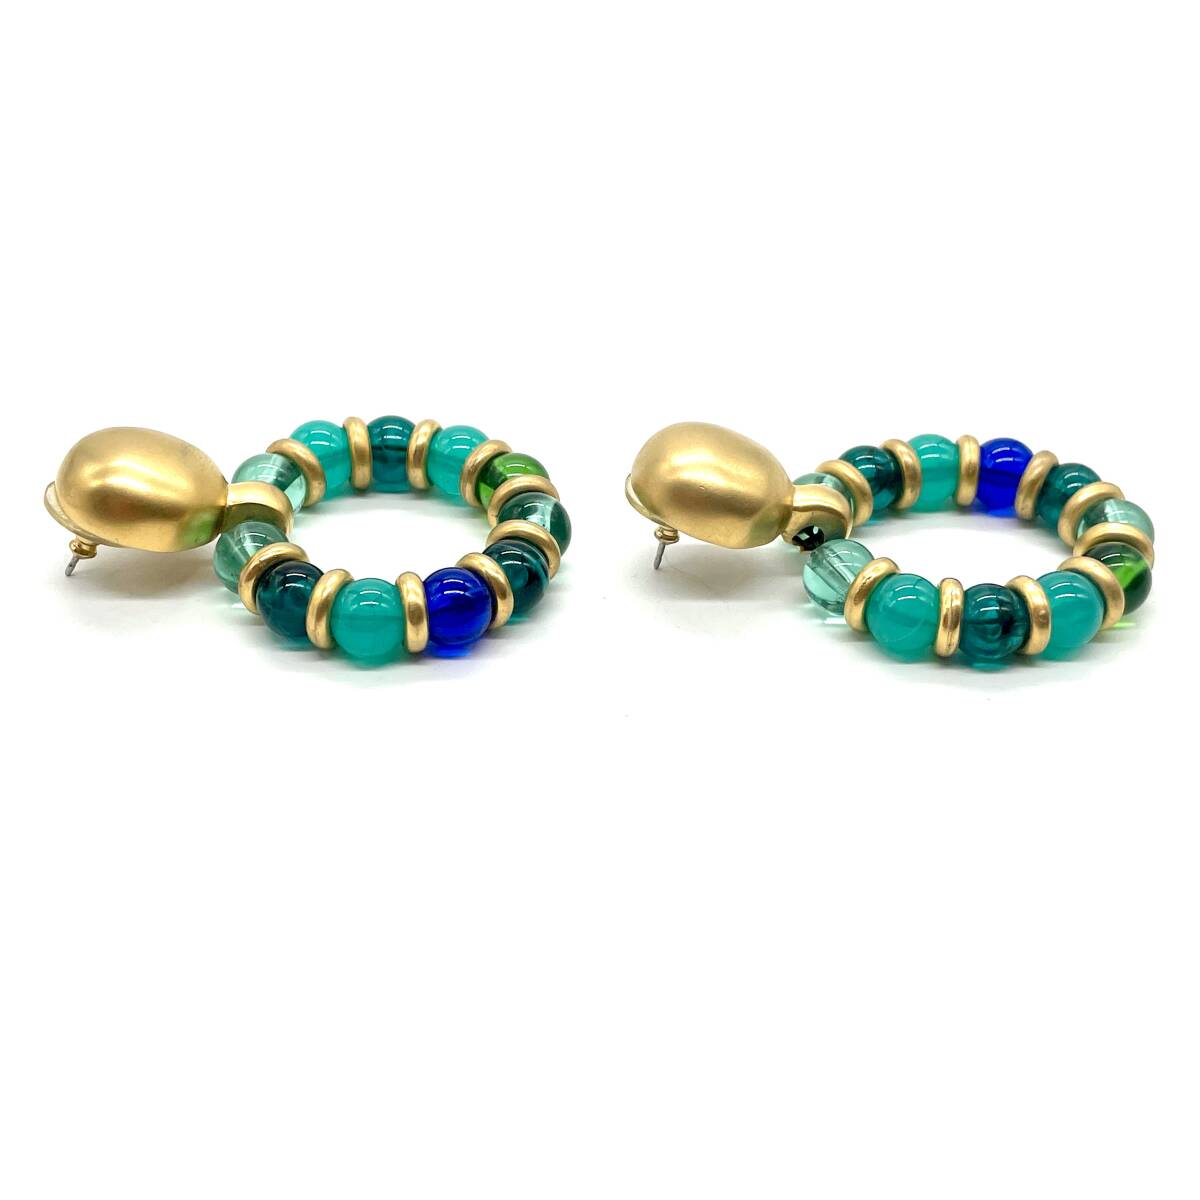 GIVENCHY Givenchy earrings Vintage multi color stone Gold colorful costume jewelry brand accessory 